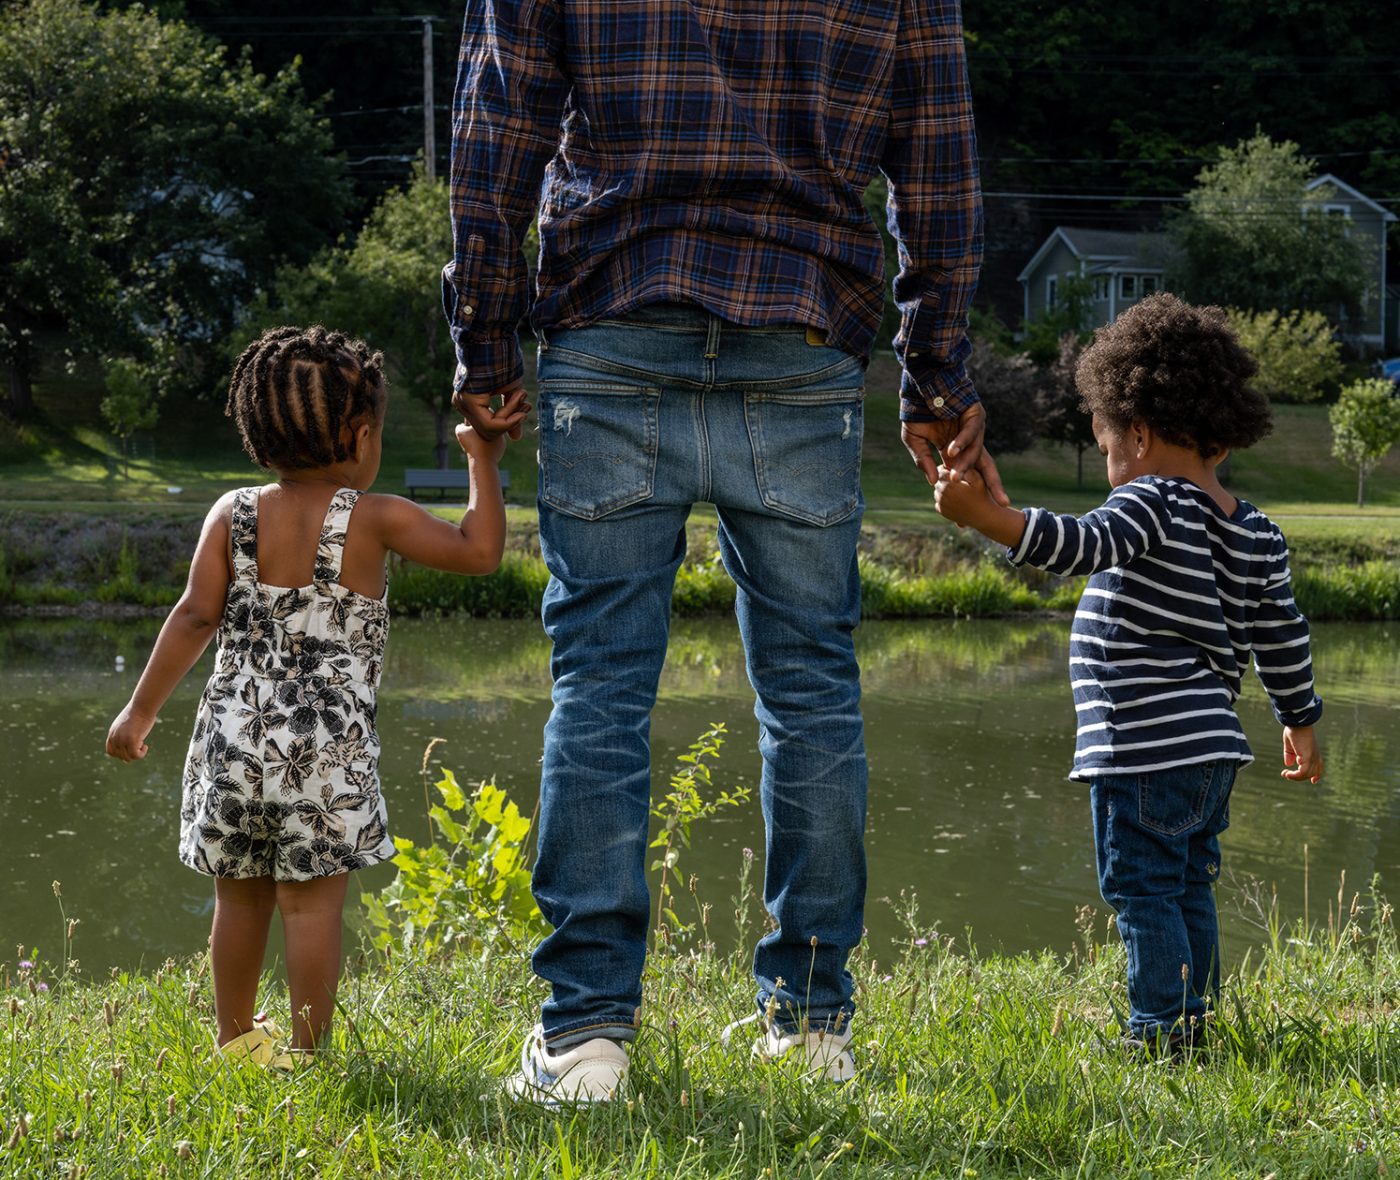 A Black man holds the hands of a Black boy and a Black girl next to a pond on a summer day